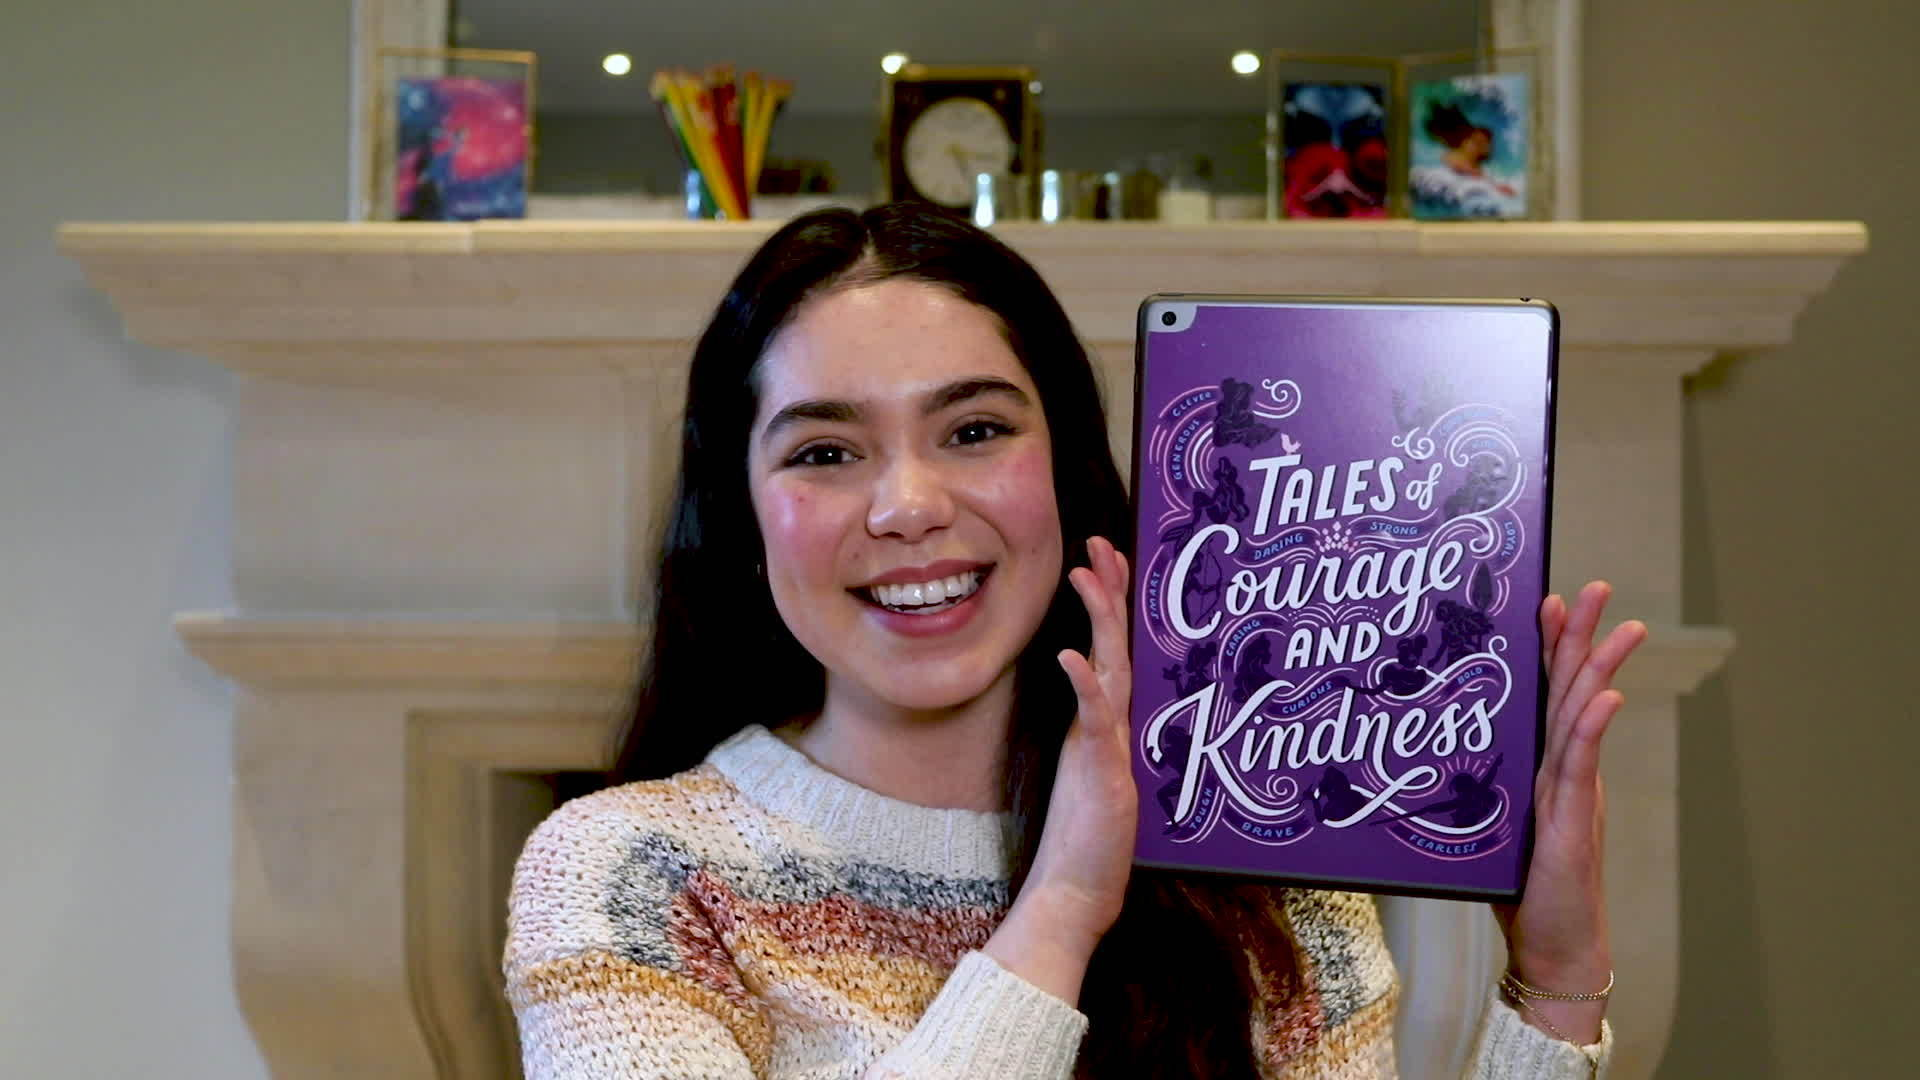 Auli'i Cravalho Reads from “Tales of Courage and Kindness”